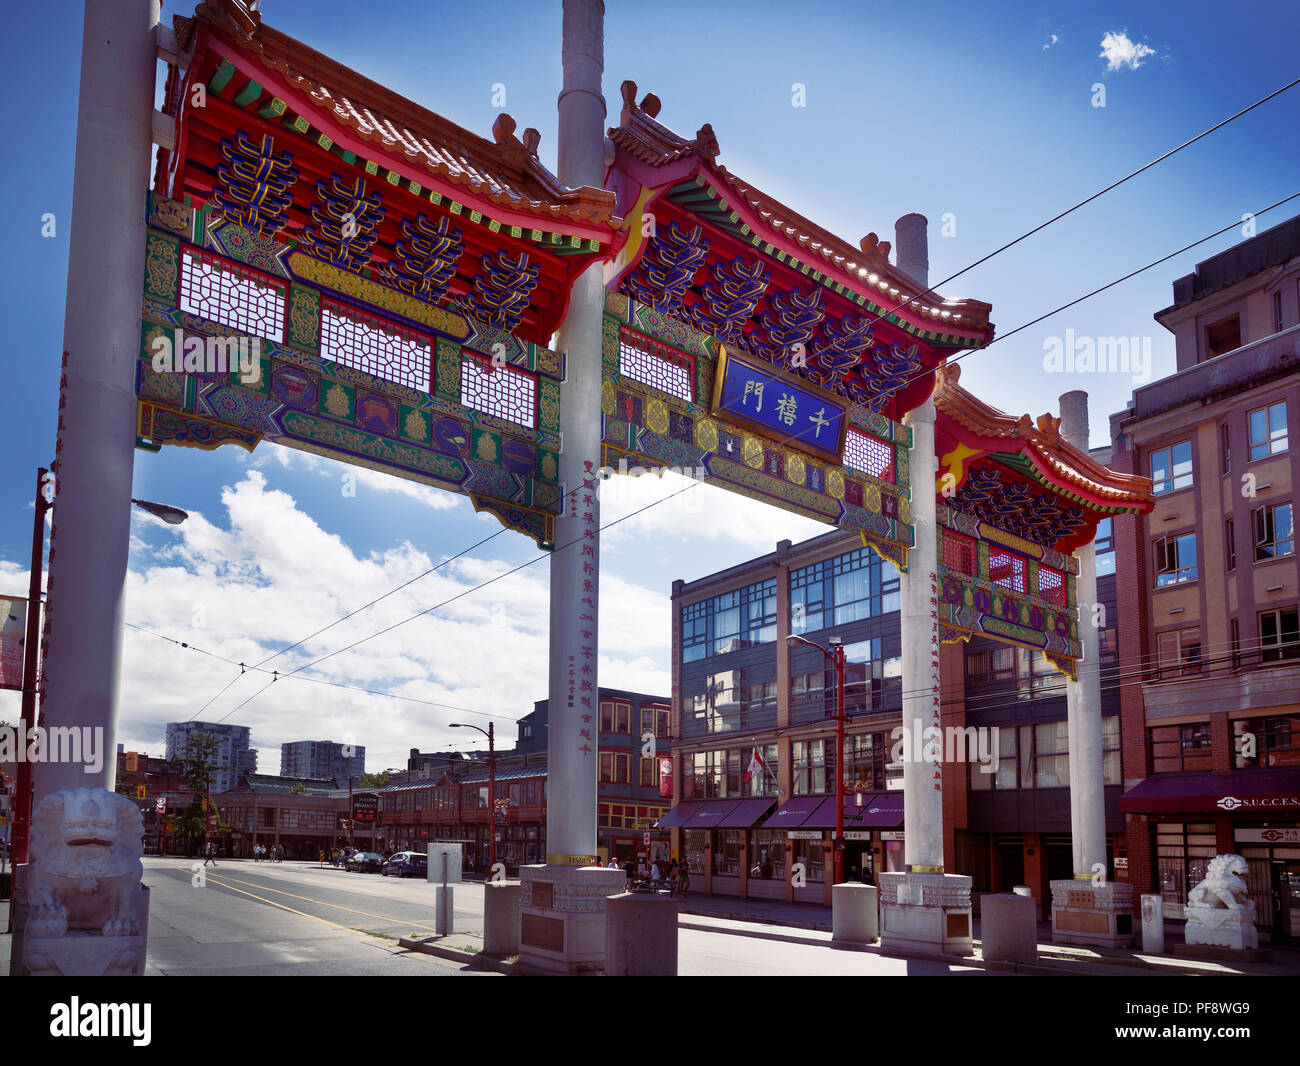 Chinatown Millennium Gate on Pender Street a Vancouver, British Columbia, Canada 2018 Foto Stock